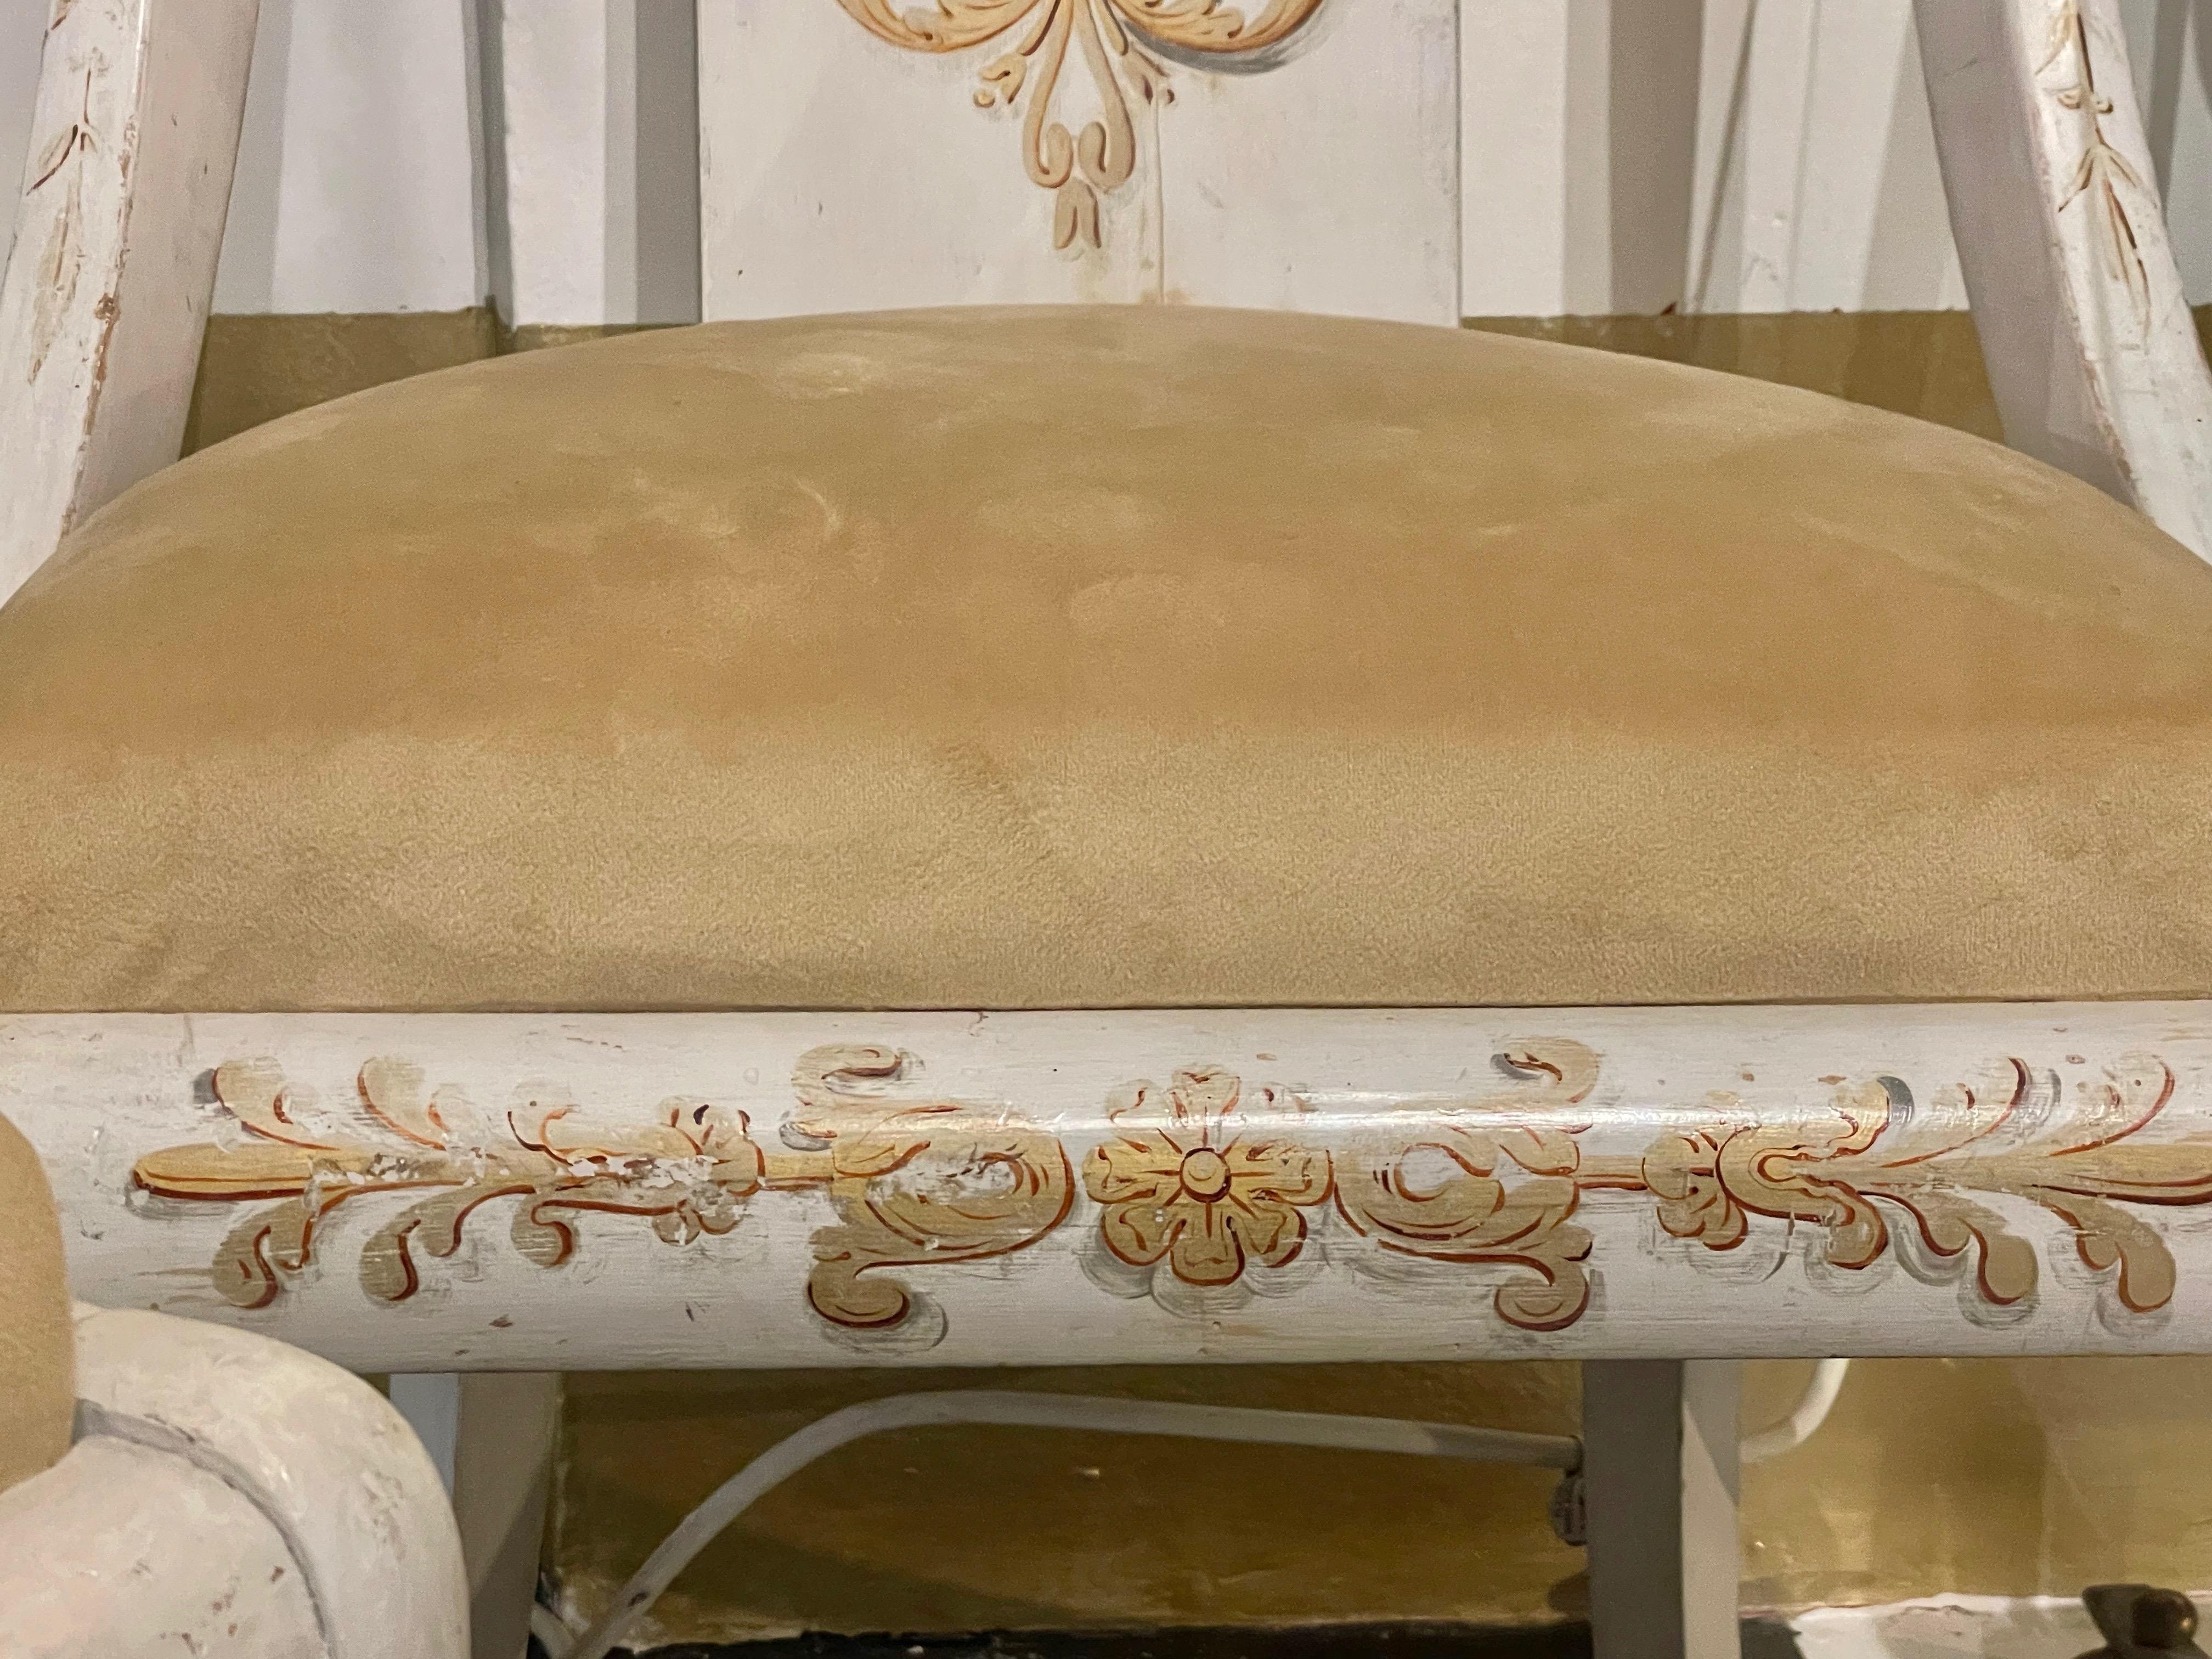 Upholstery Pair of French White and Gilt Empire Chairs, c.1820 For Sale